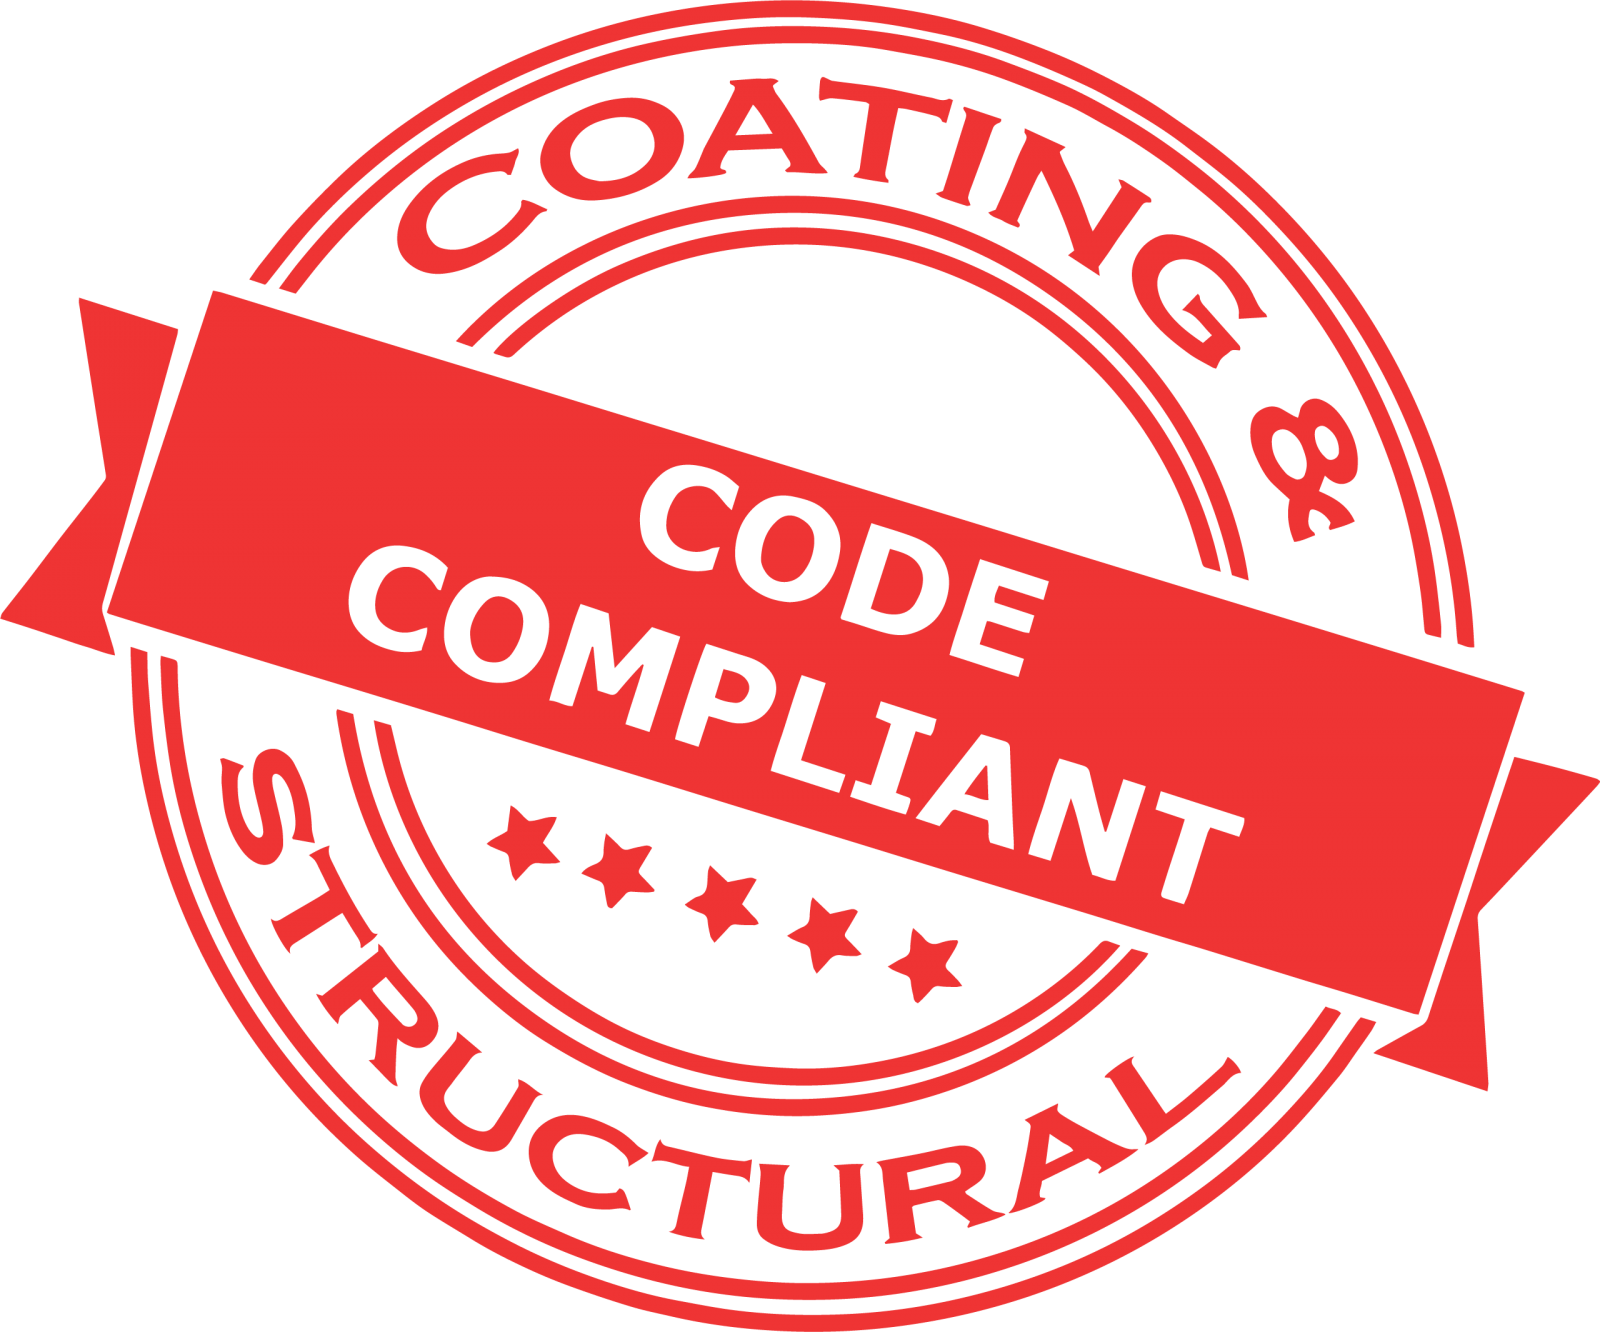 Coating & Structural Code Compliant